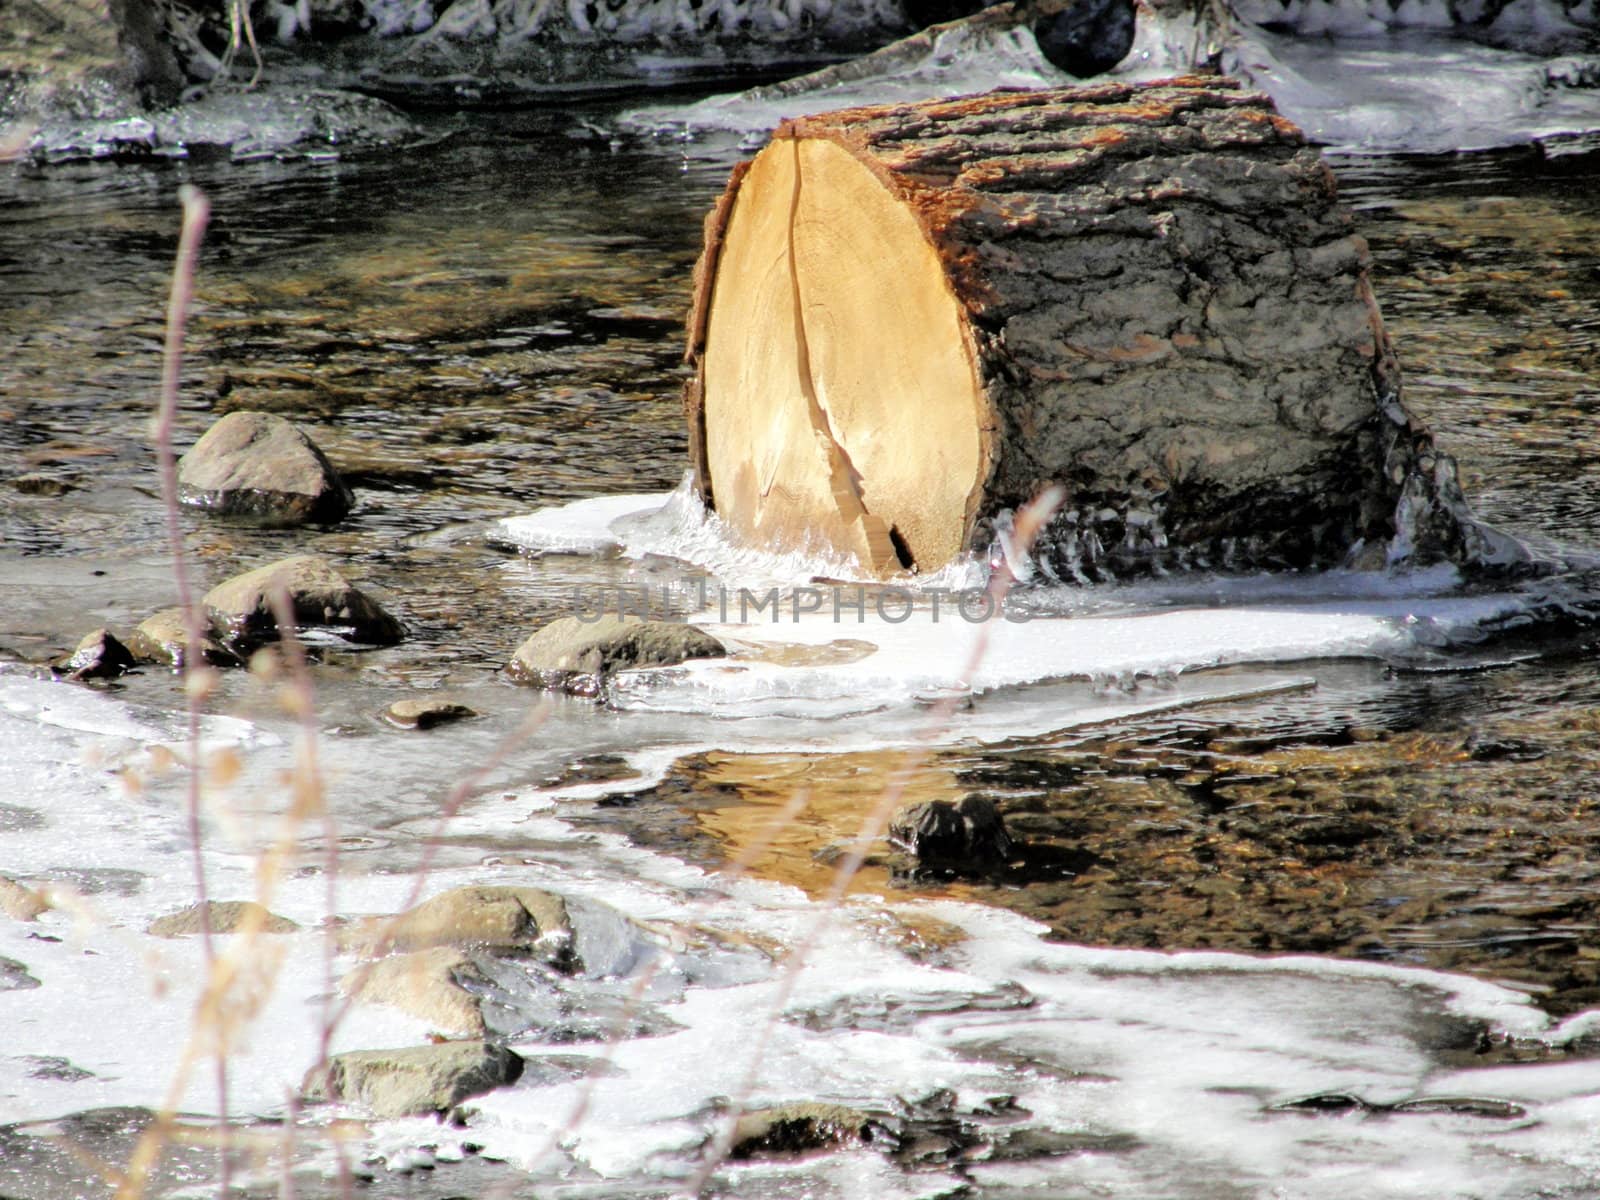 a close-up of a log floating on a river in winter